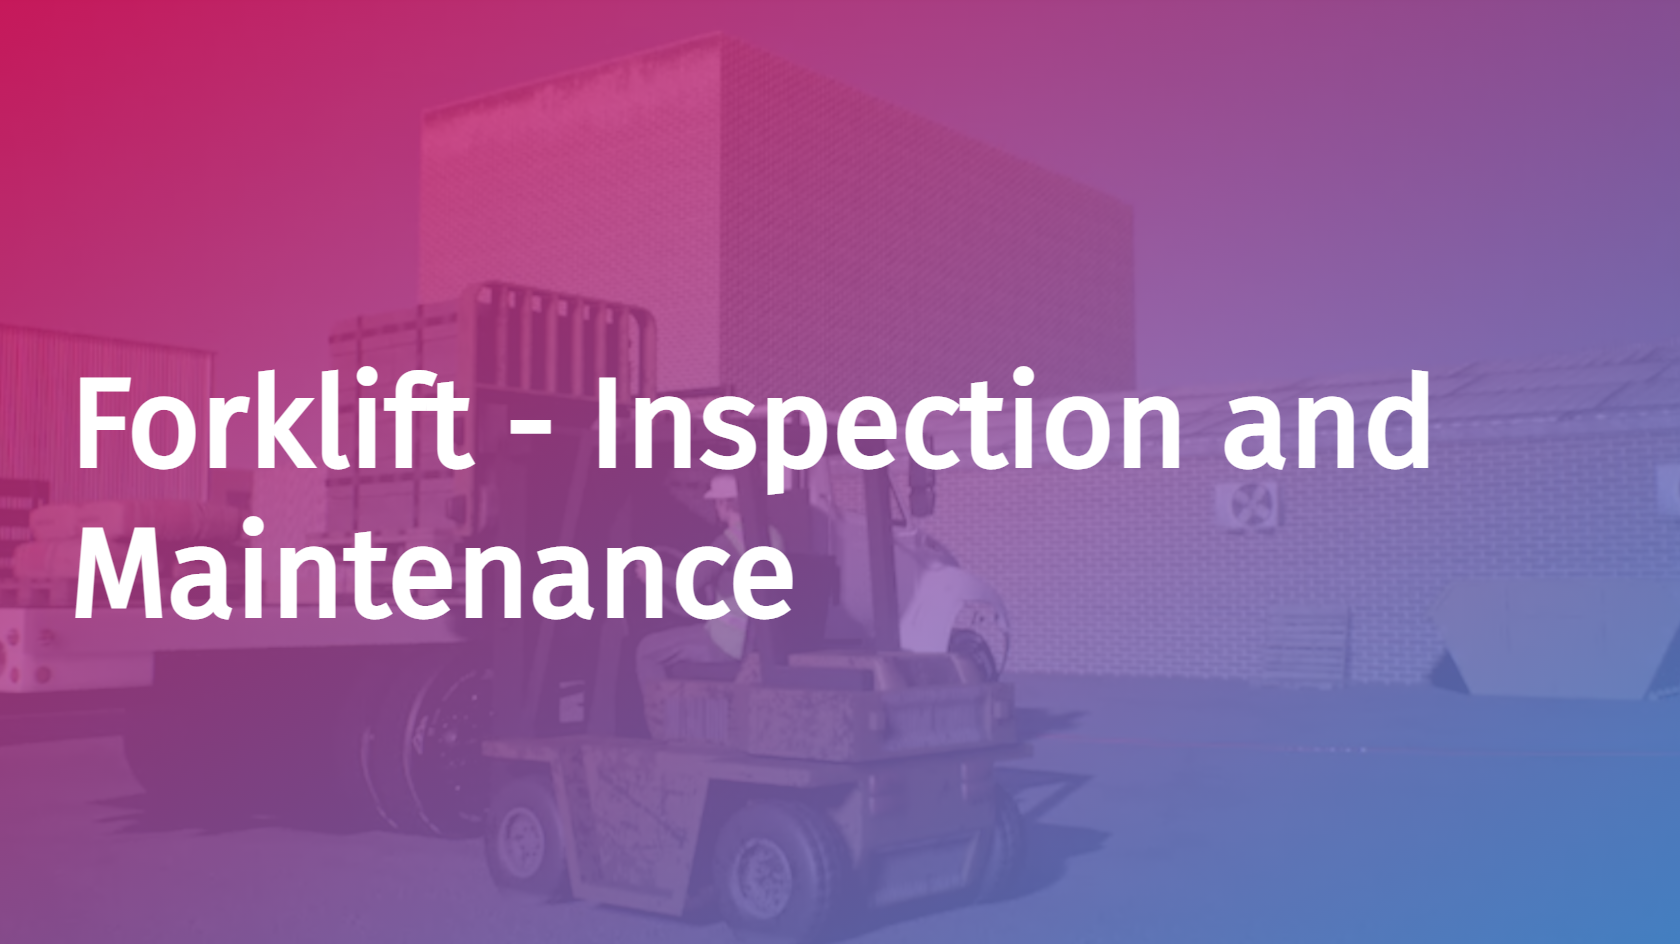 Forklift - Inspection and Maintenance